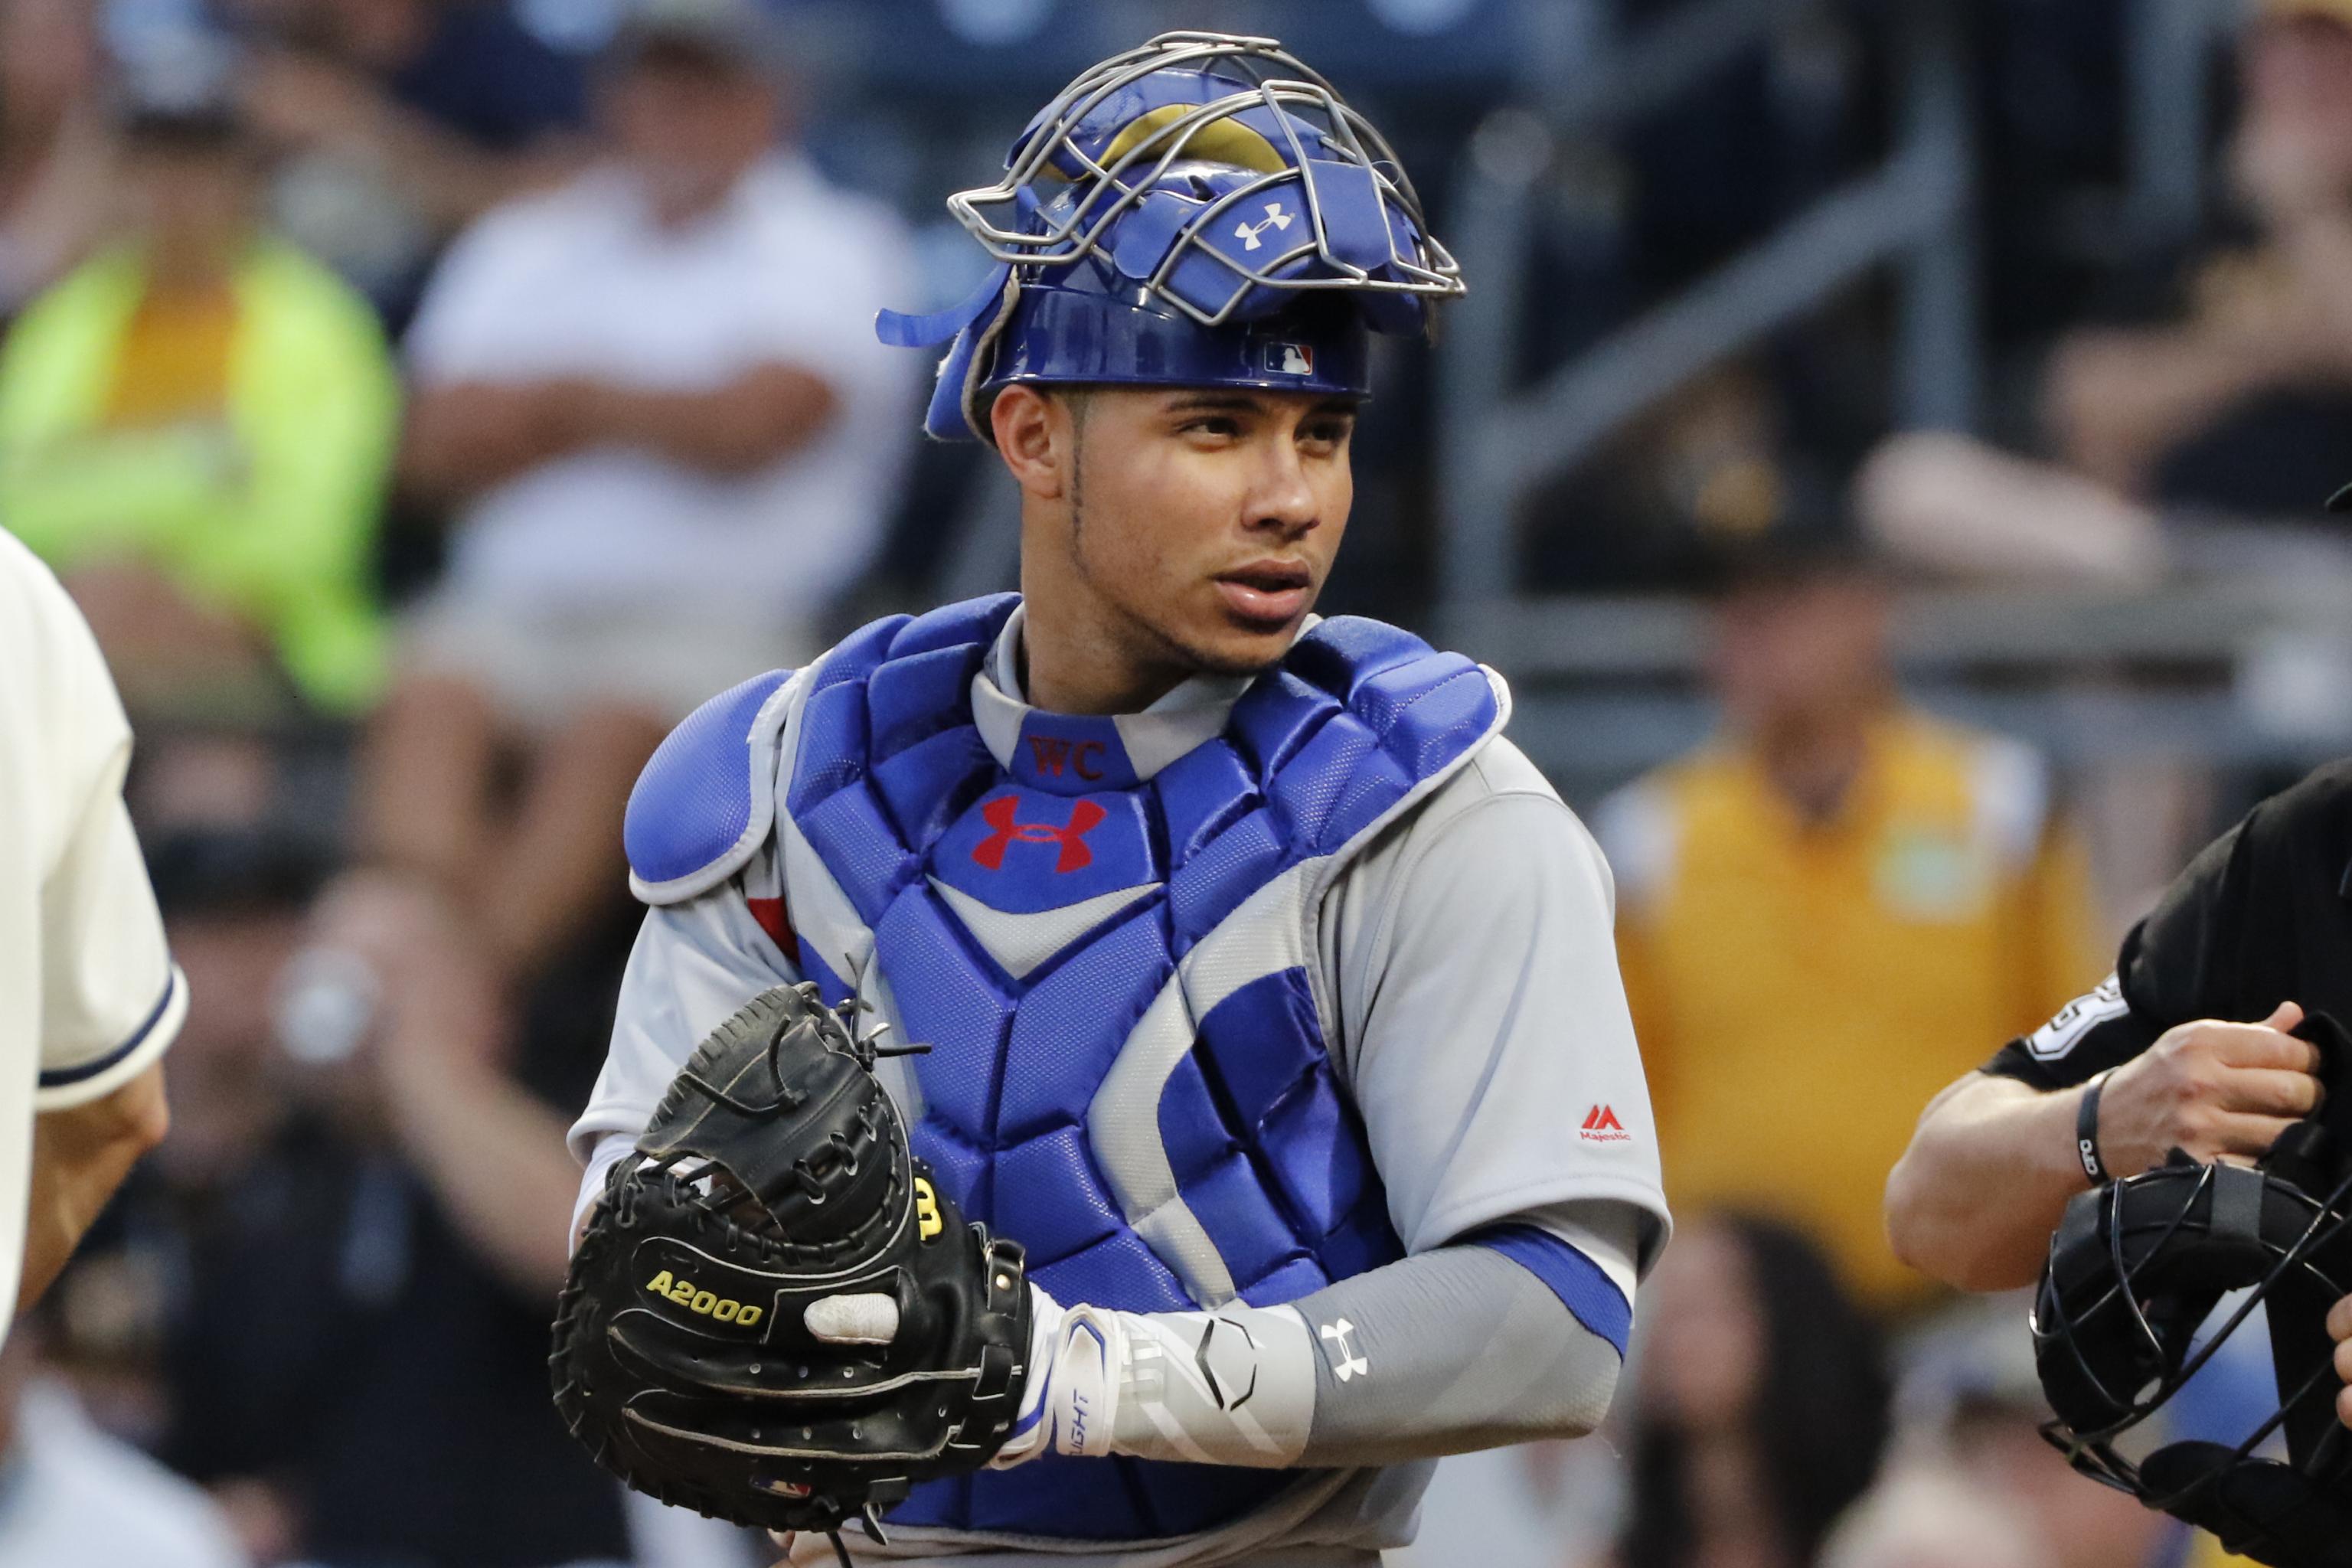 Willson Contreras Injury Could Be Death Blow to Cubs' Playoff